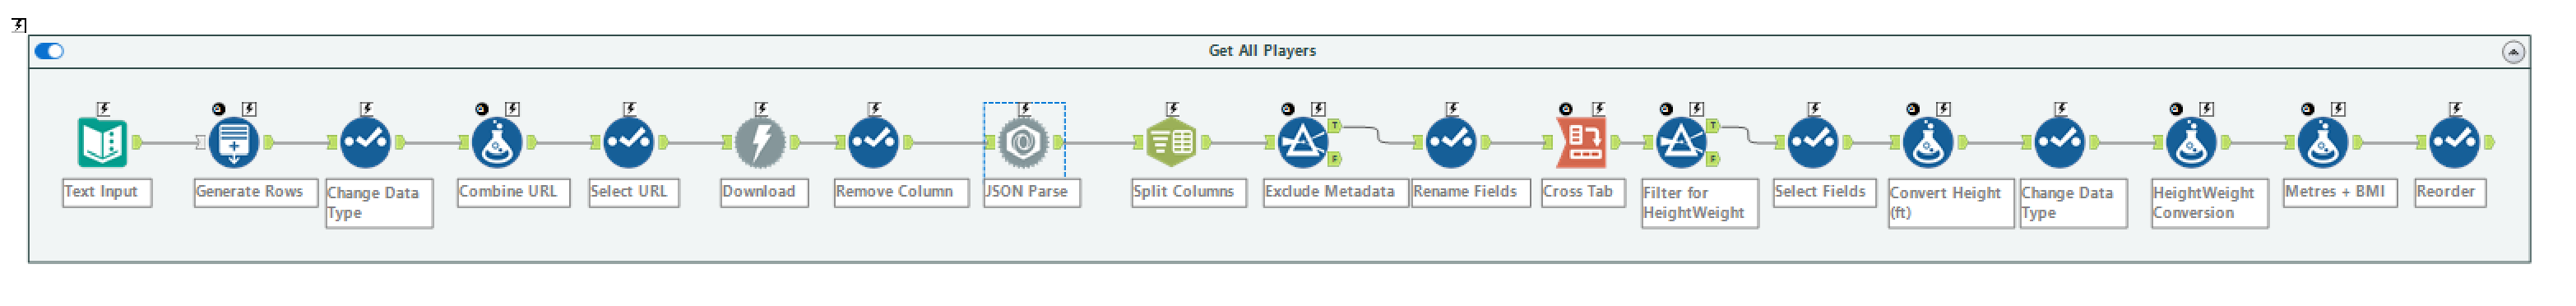 My Alteryx workflow calling the API for 'All Players' data to get it ready for visualising in Tableau